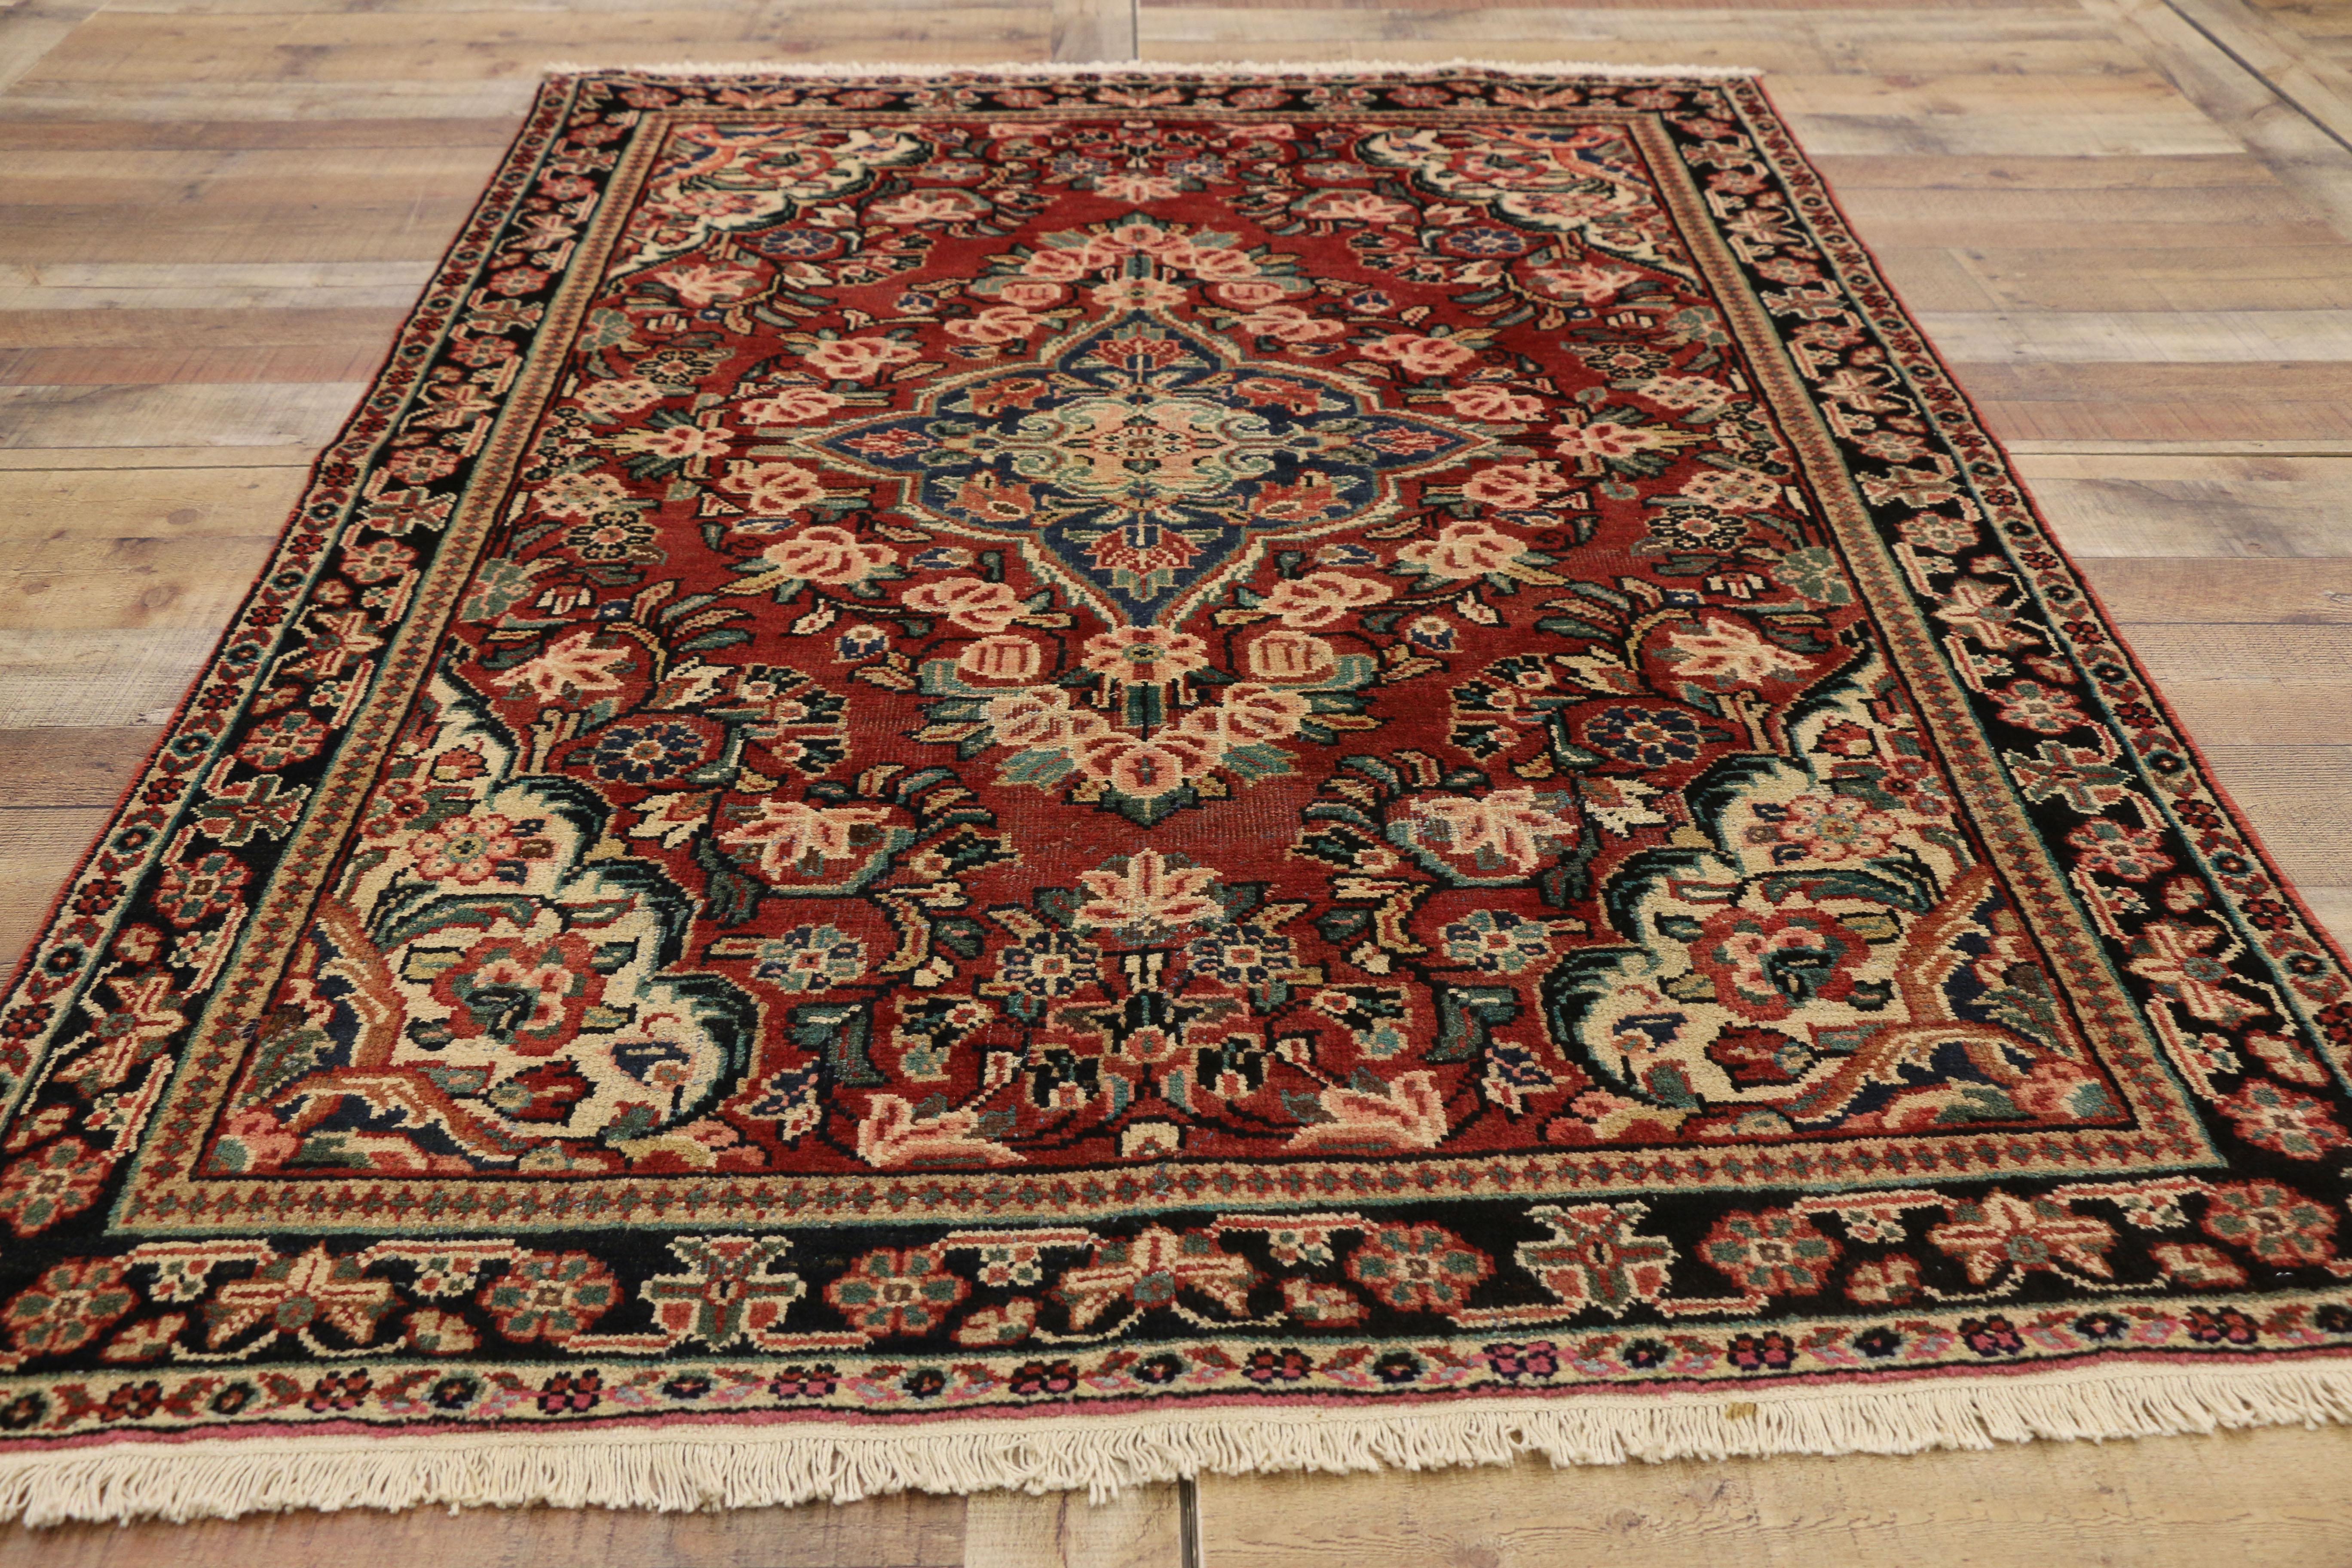 20th Century Vintage Persian Mahal Sarouk Rug with Rustic English Country Style, Entry Rug